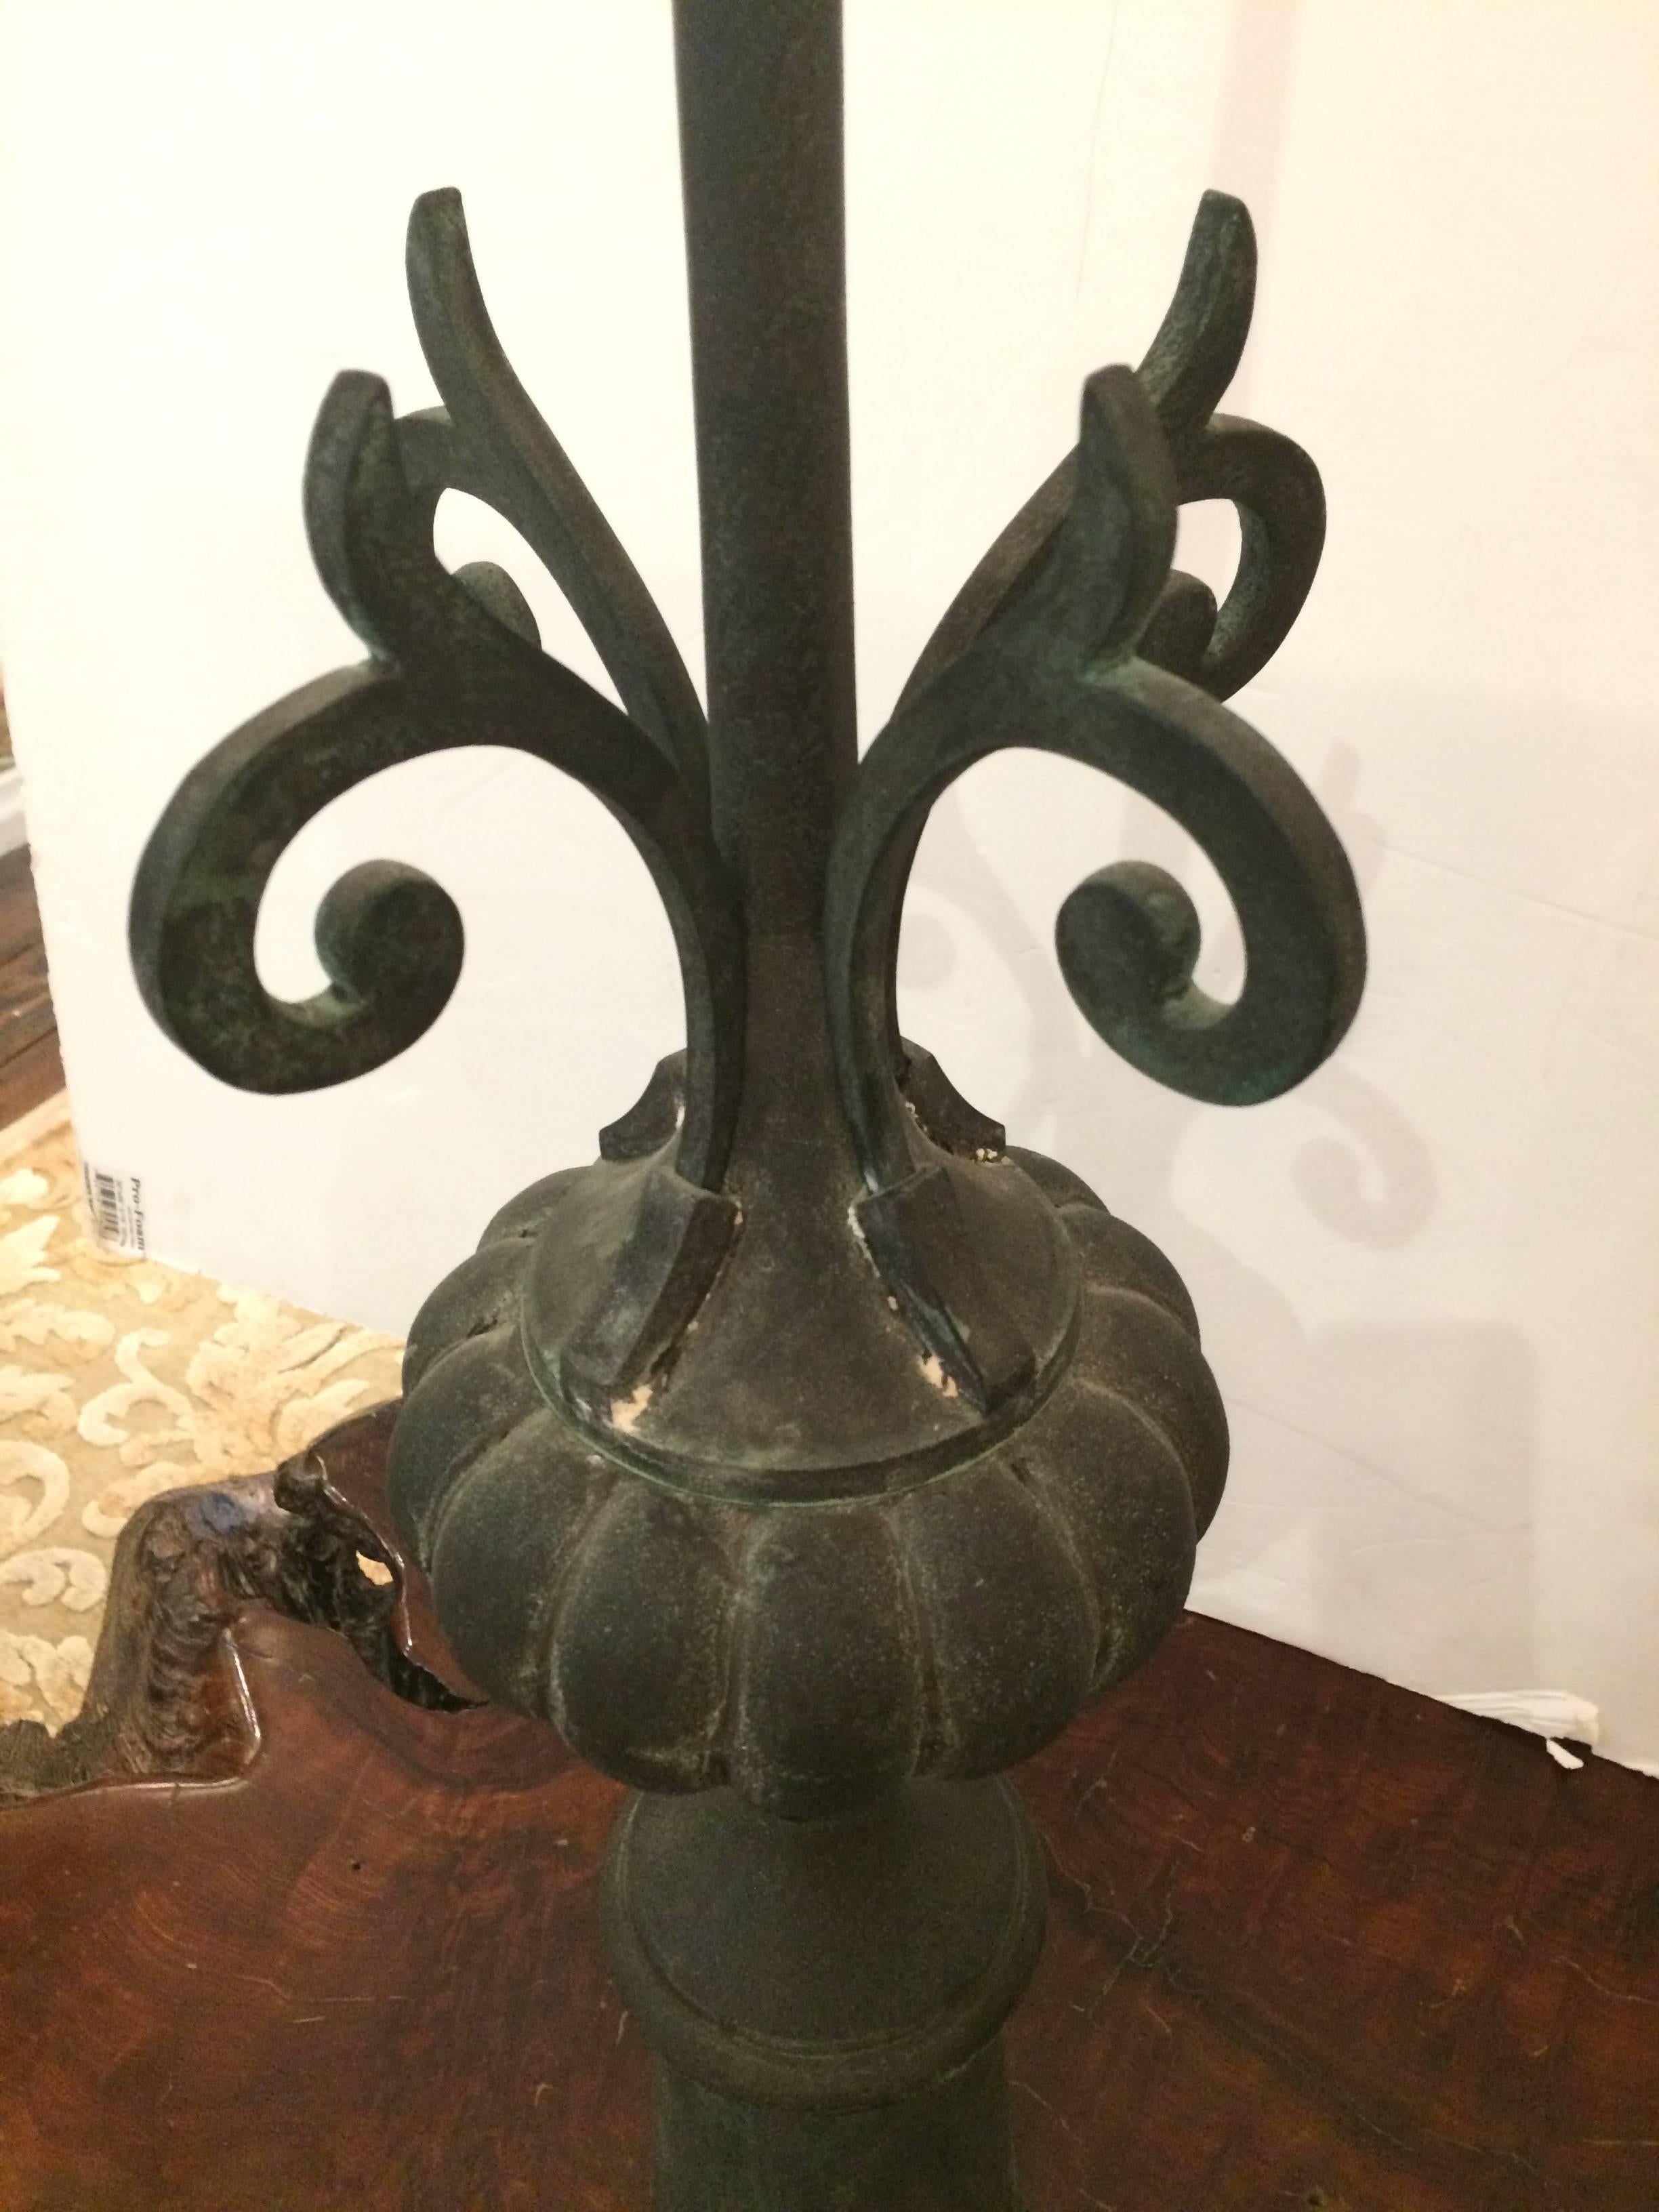 Two handsome dark grey iron finials having a central tall spike and curlicues on a fluted bulb and column base. Have an aged appearance.